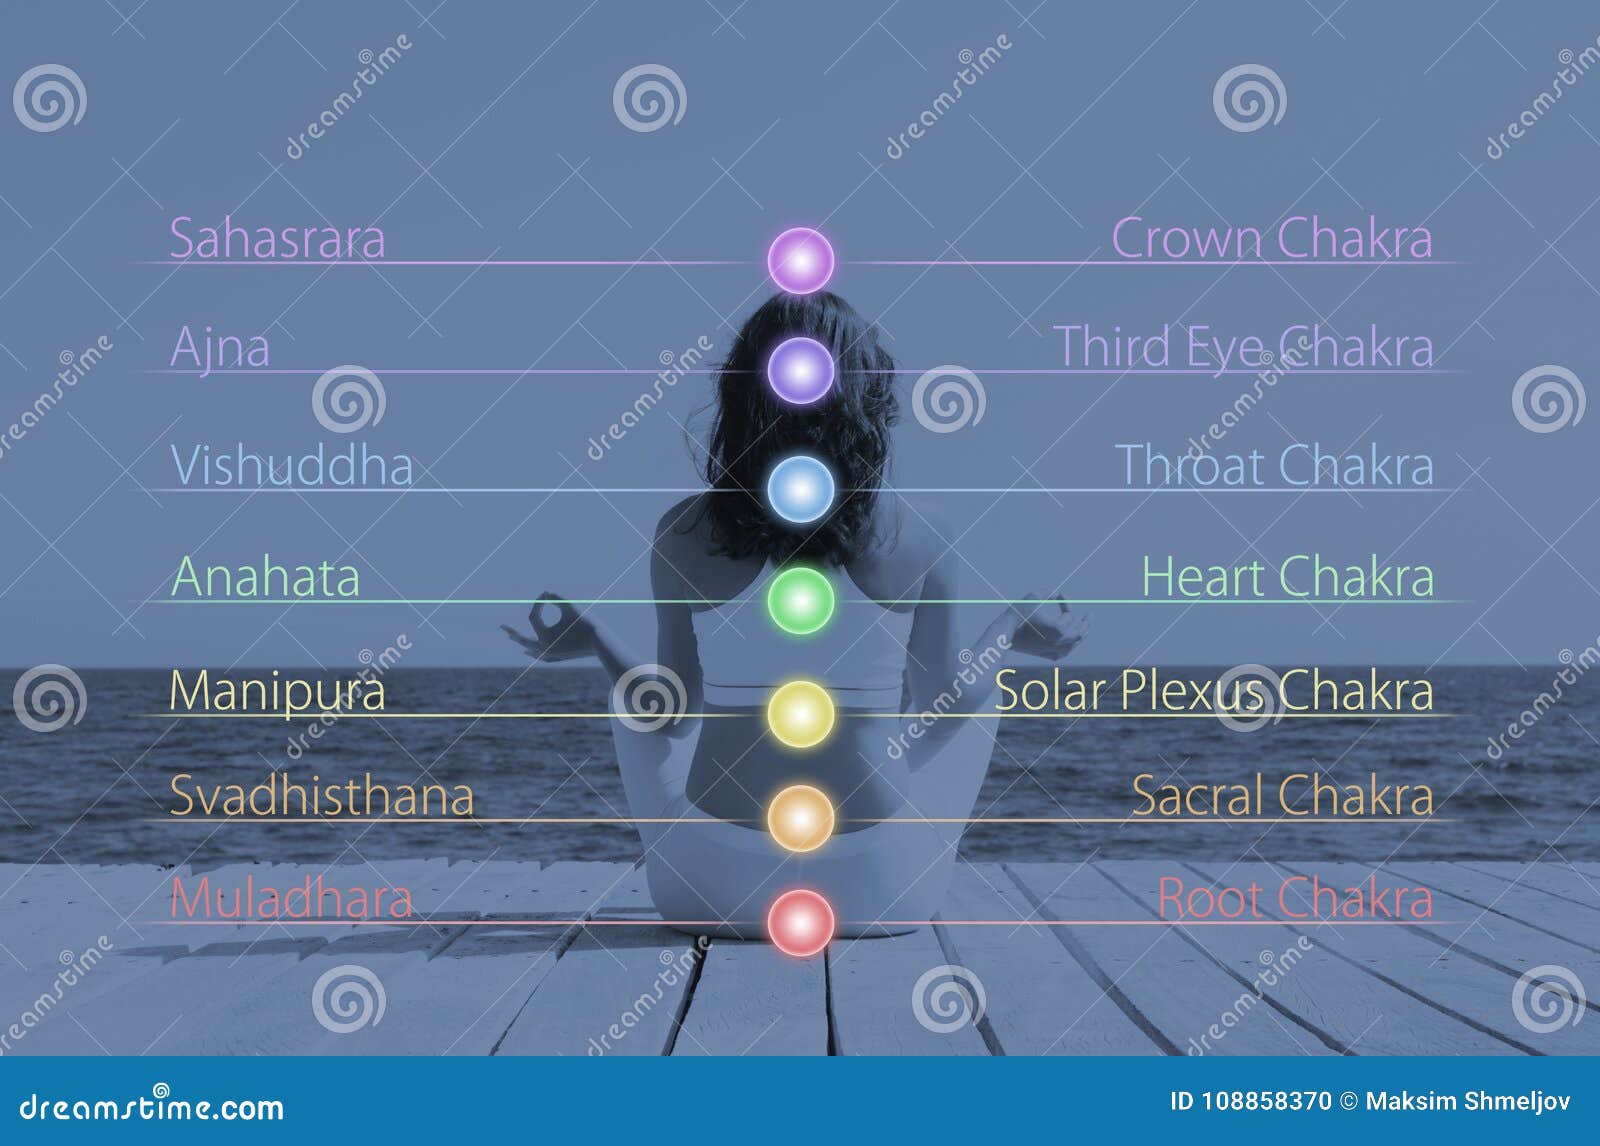 woman meditating in lotus position outdoor. chakra lights over her body.